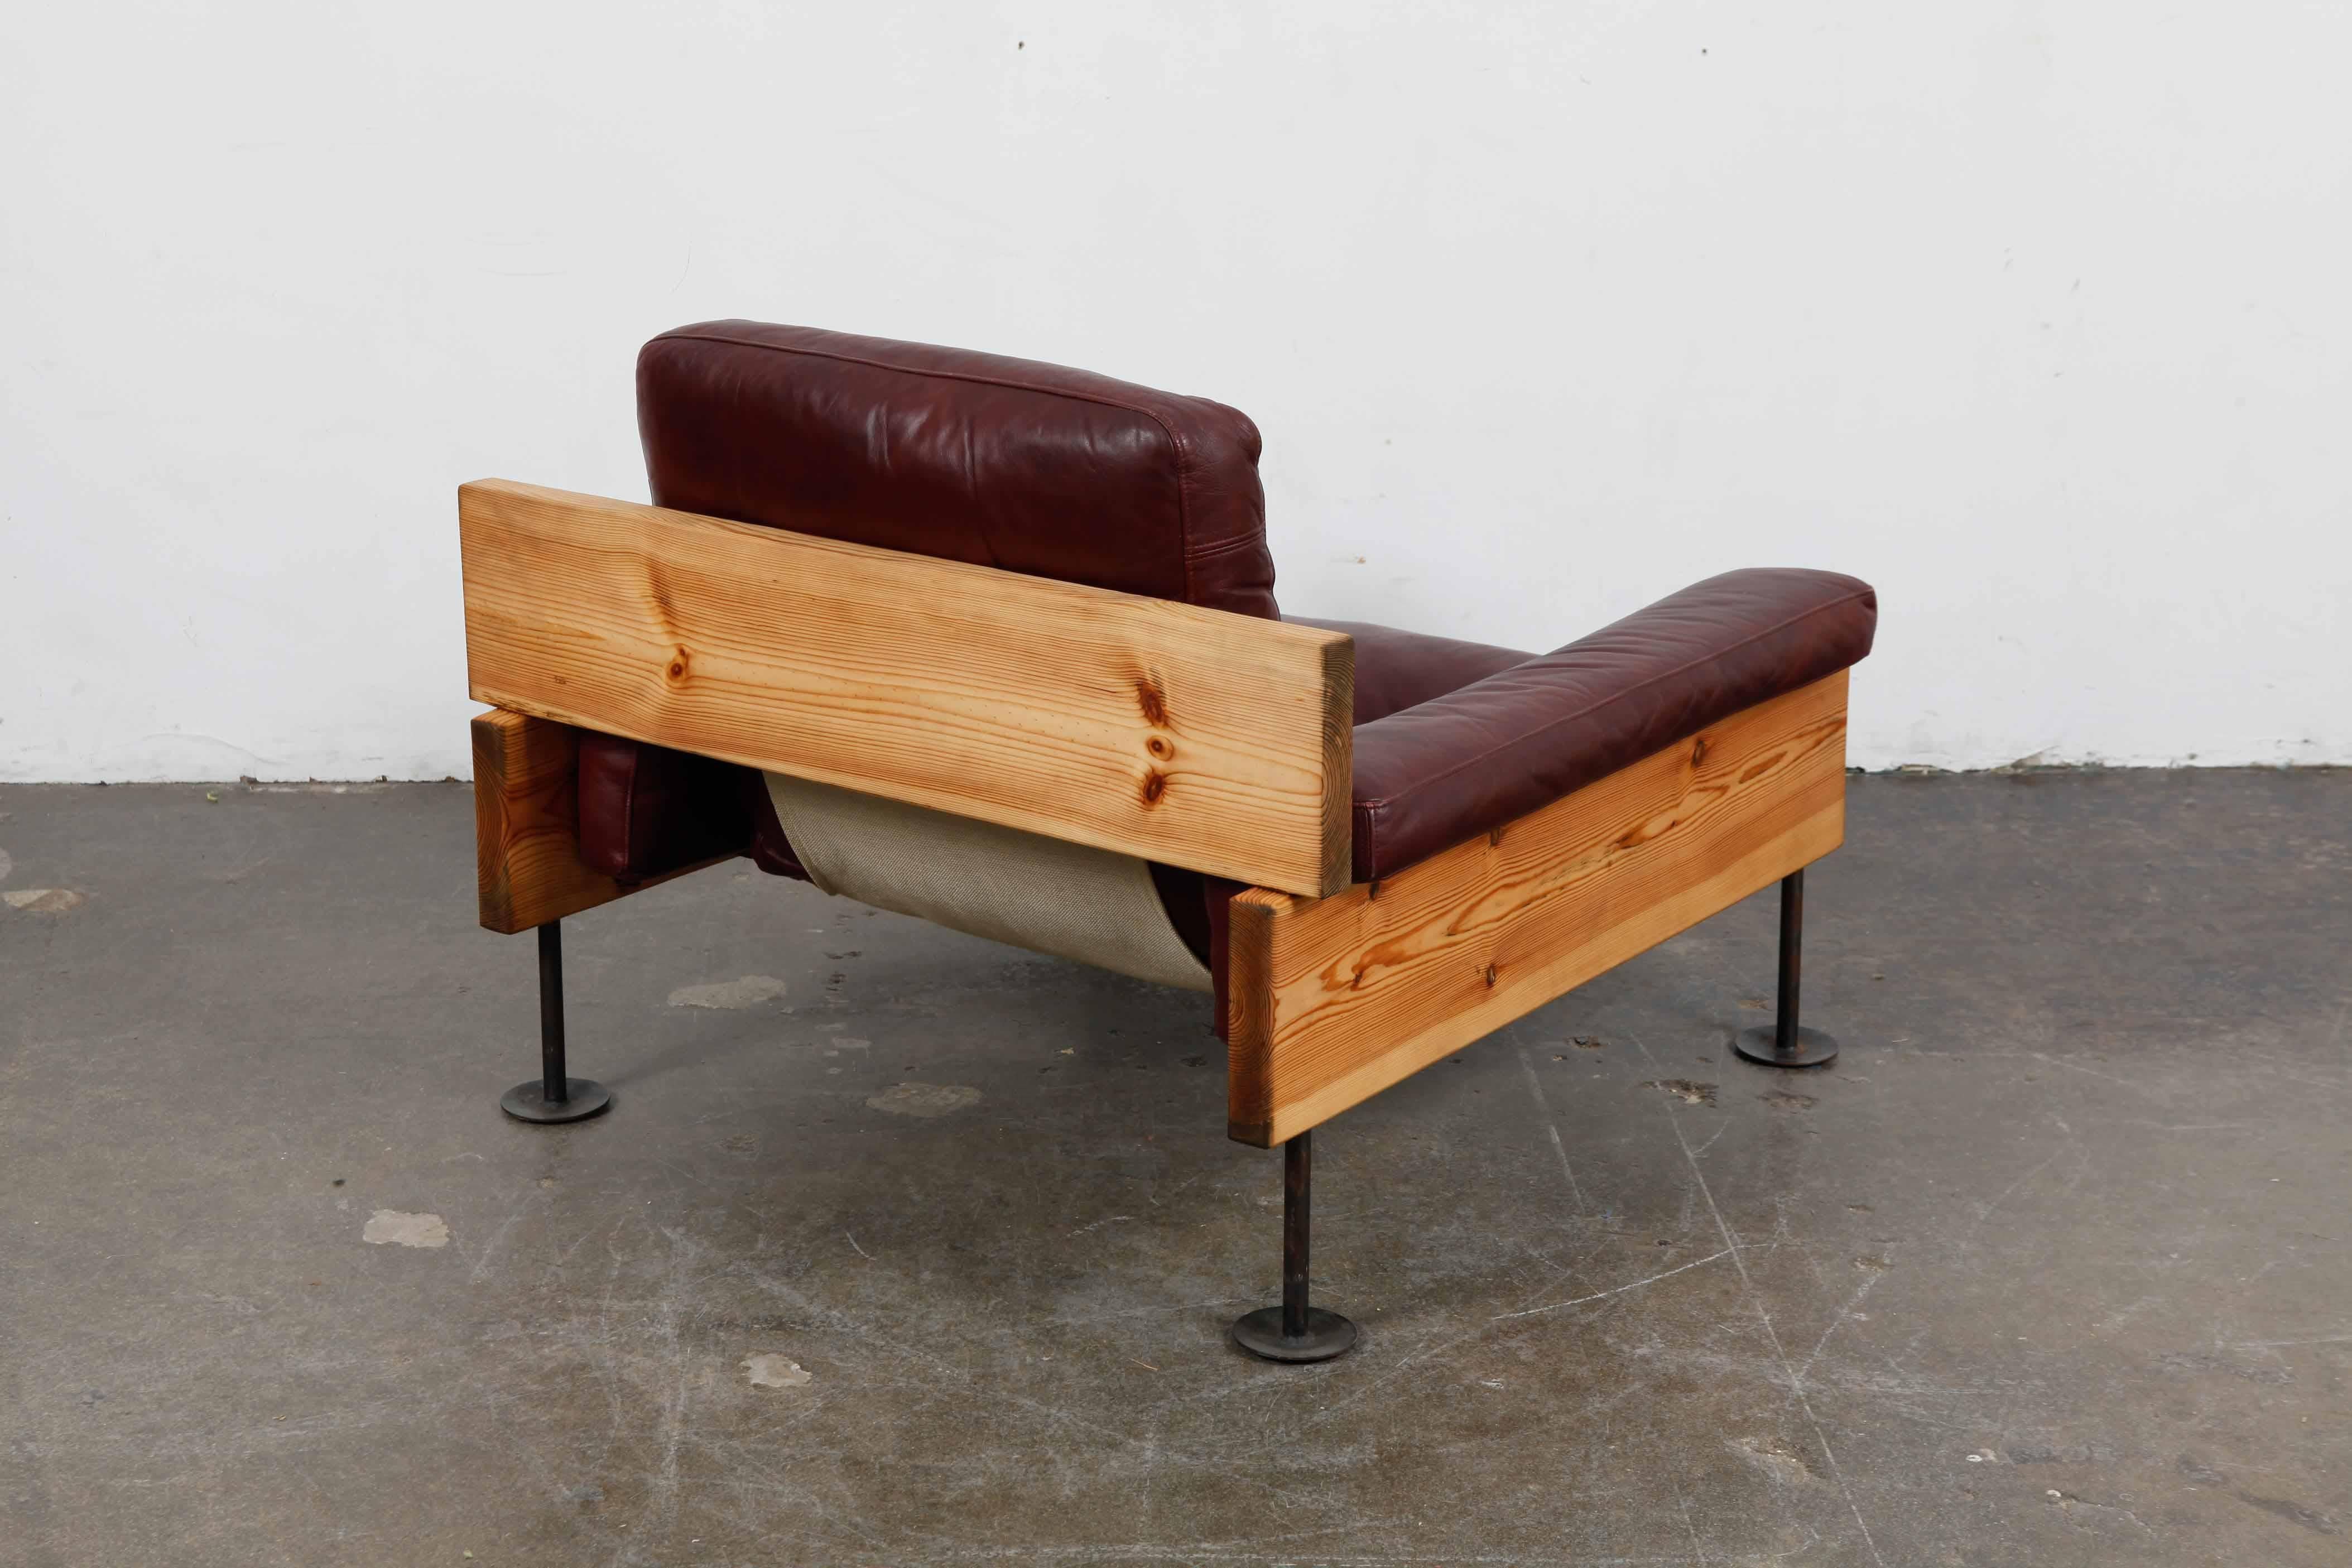 Mid-Century Modern Low Finnish Lounge Chair by Hannu Jyräs in Solid Pine with Original Leather